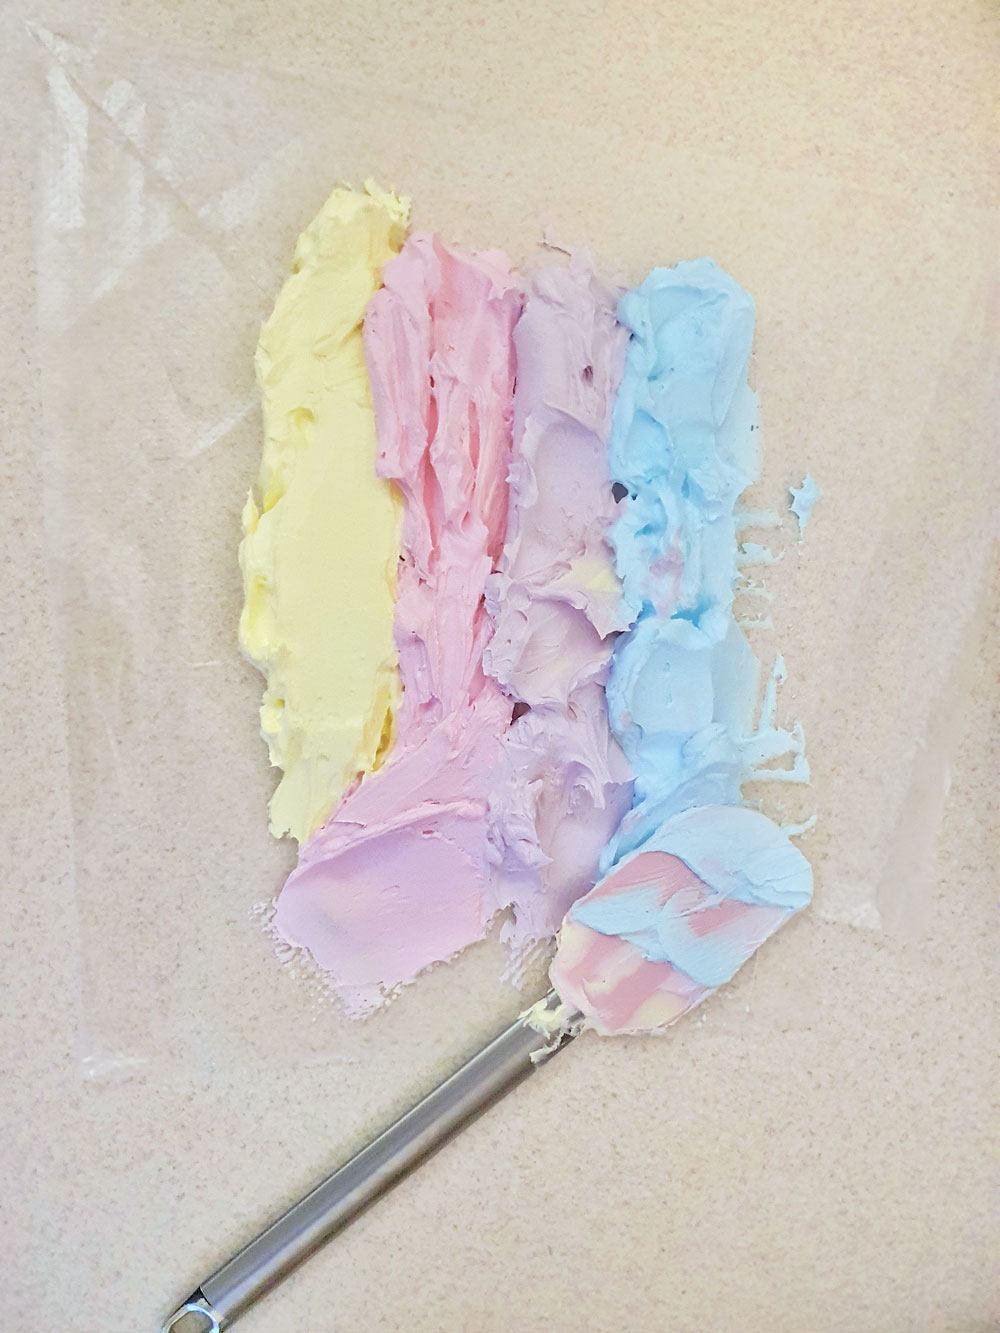 layering different colors of soap on a plastic sheet